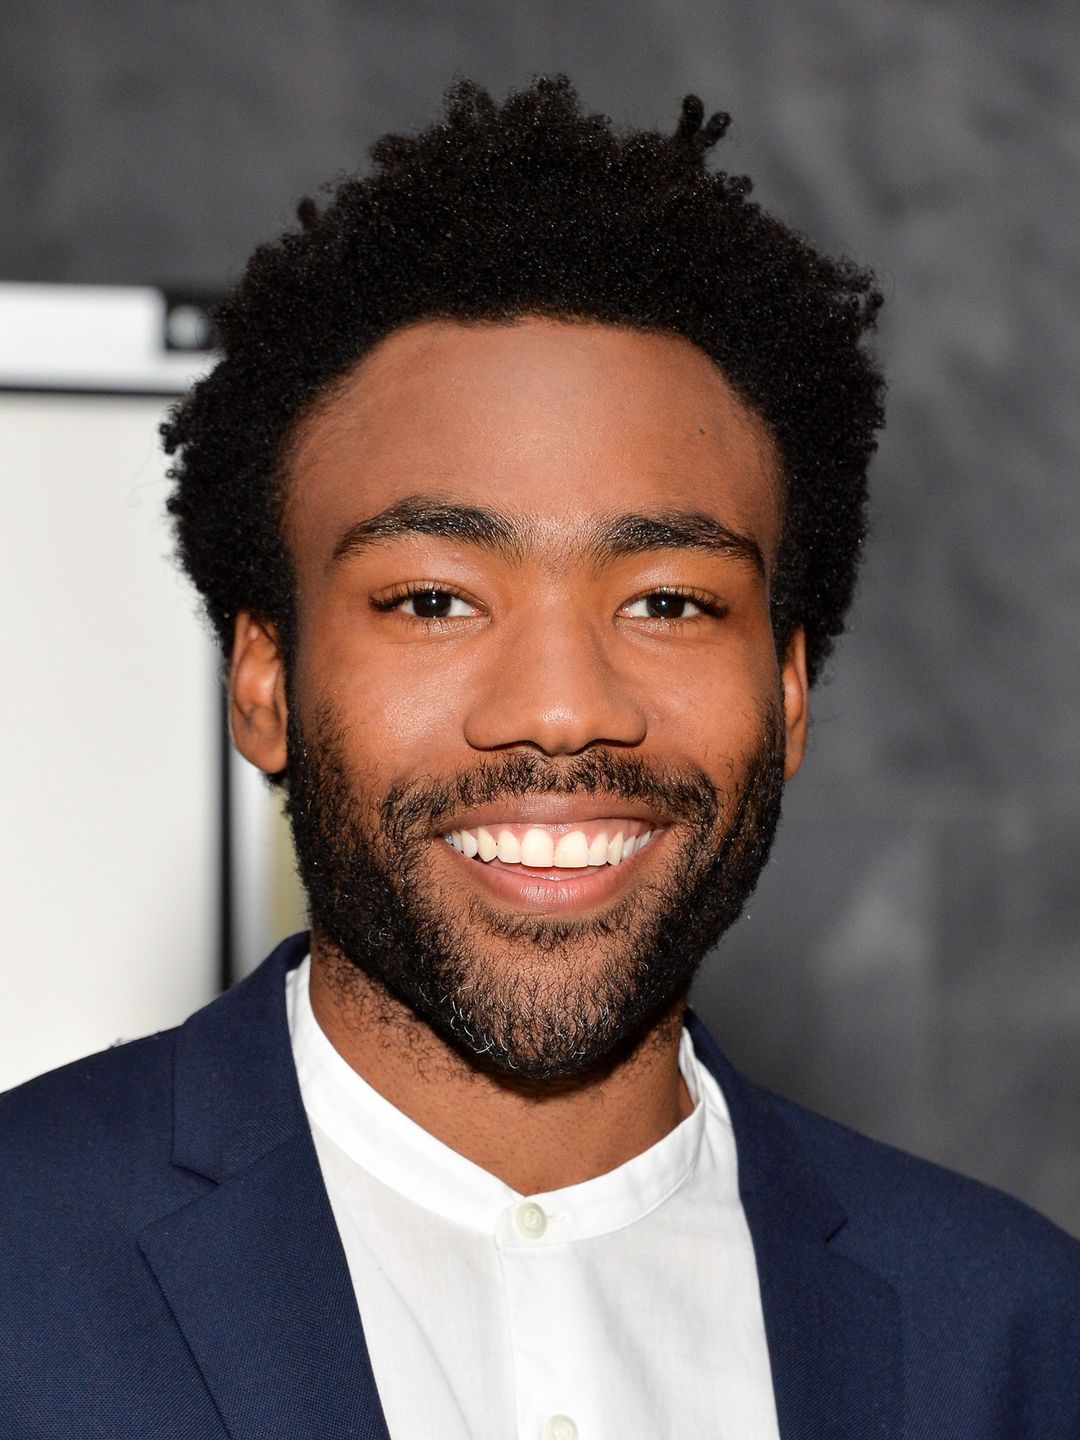 Donald Glover young pics